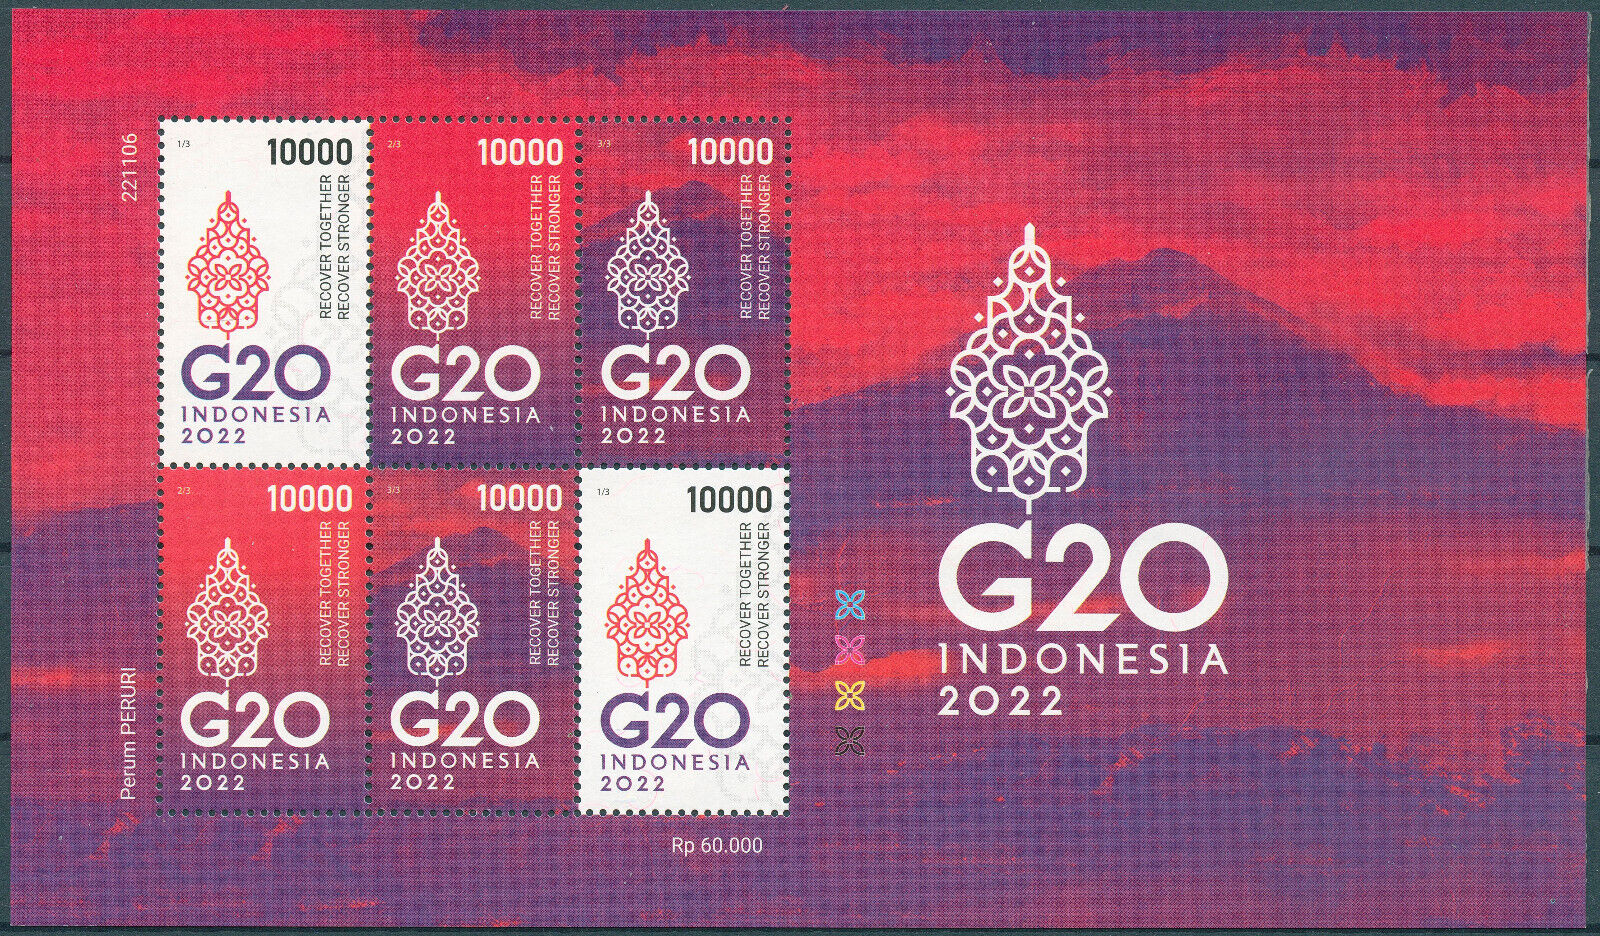 Indonesia 2022 MNH Stamps G20 Bali Summit Recover Together 6v M/S